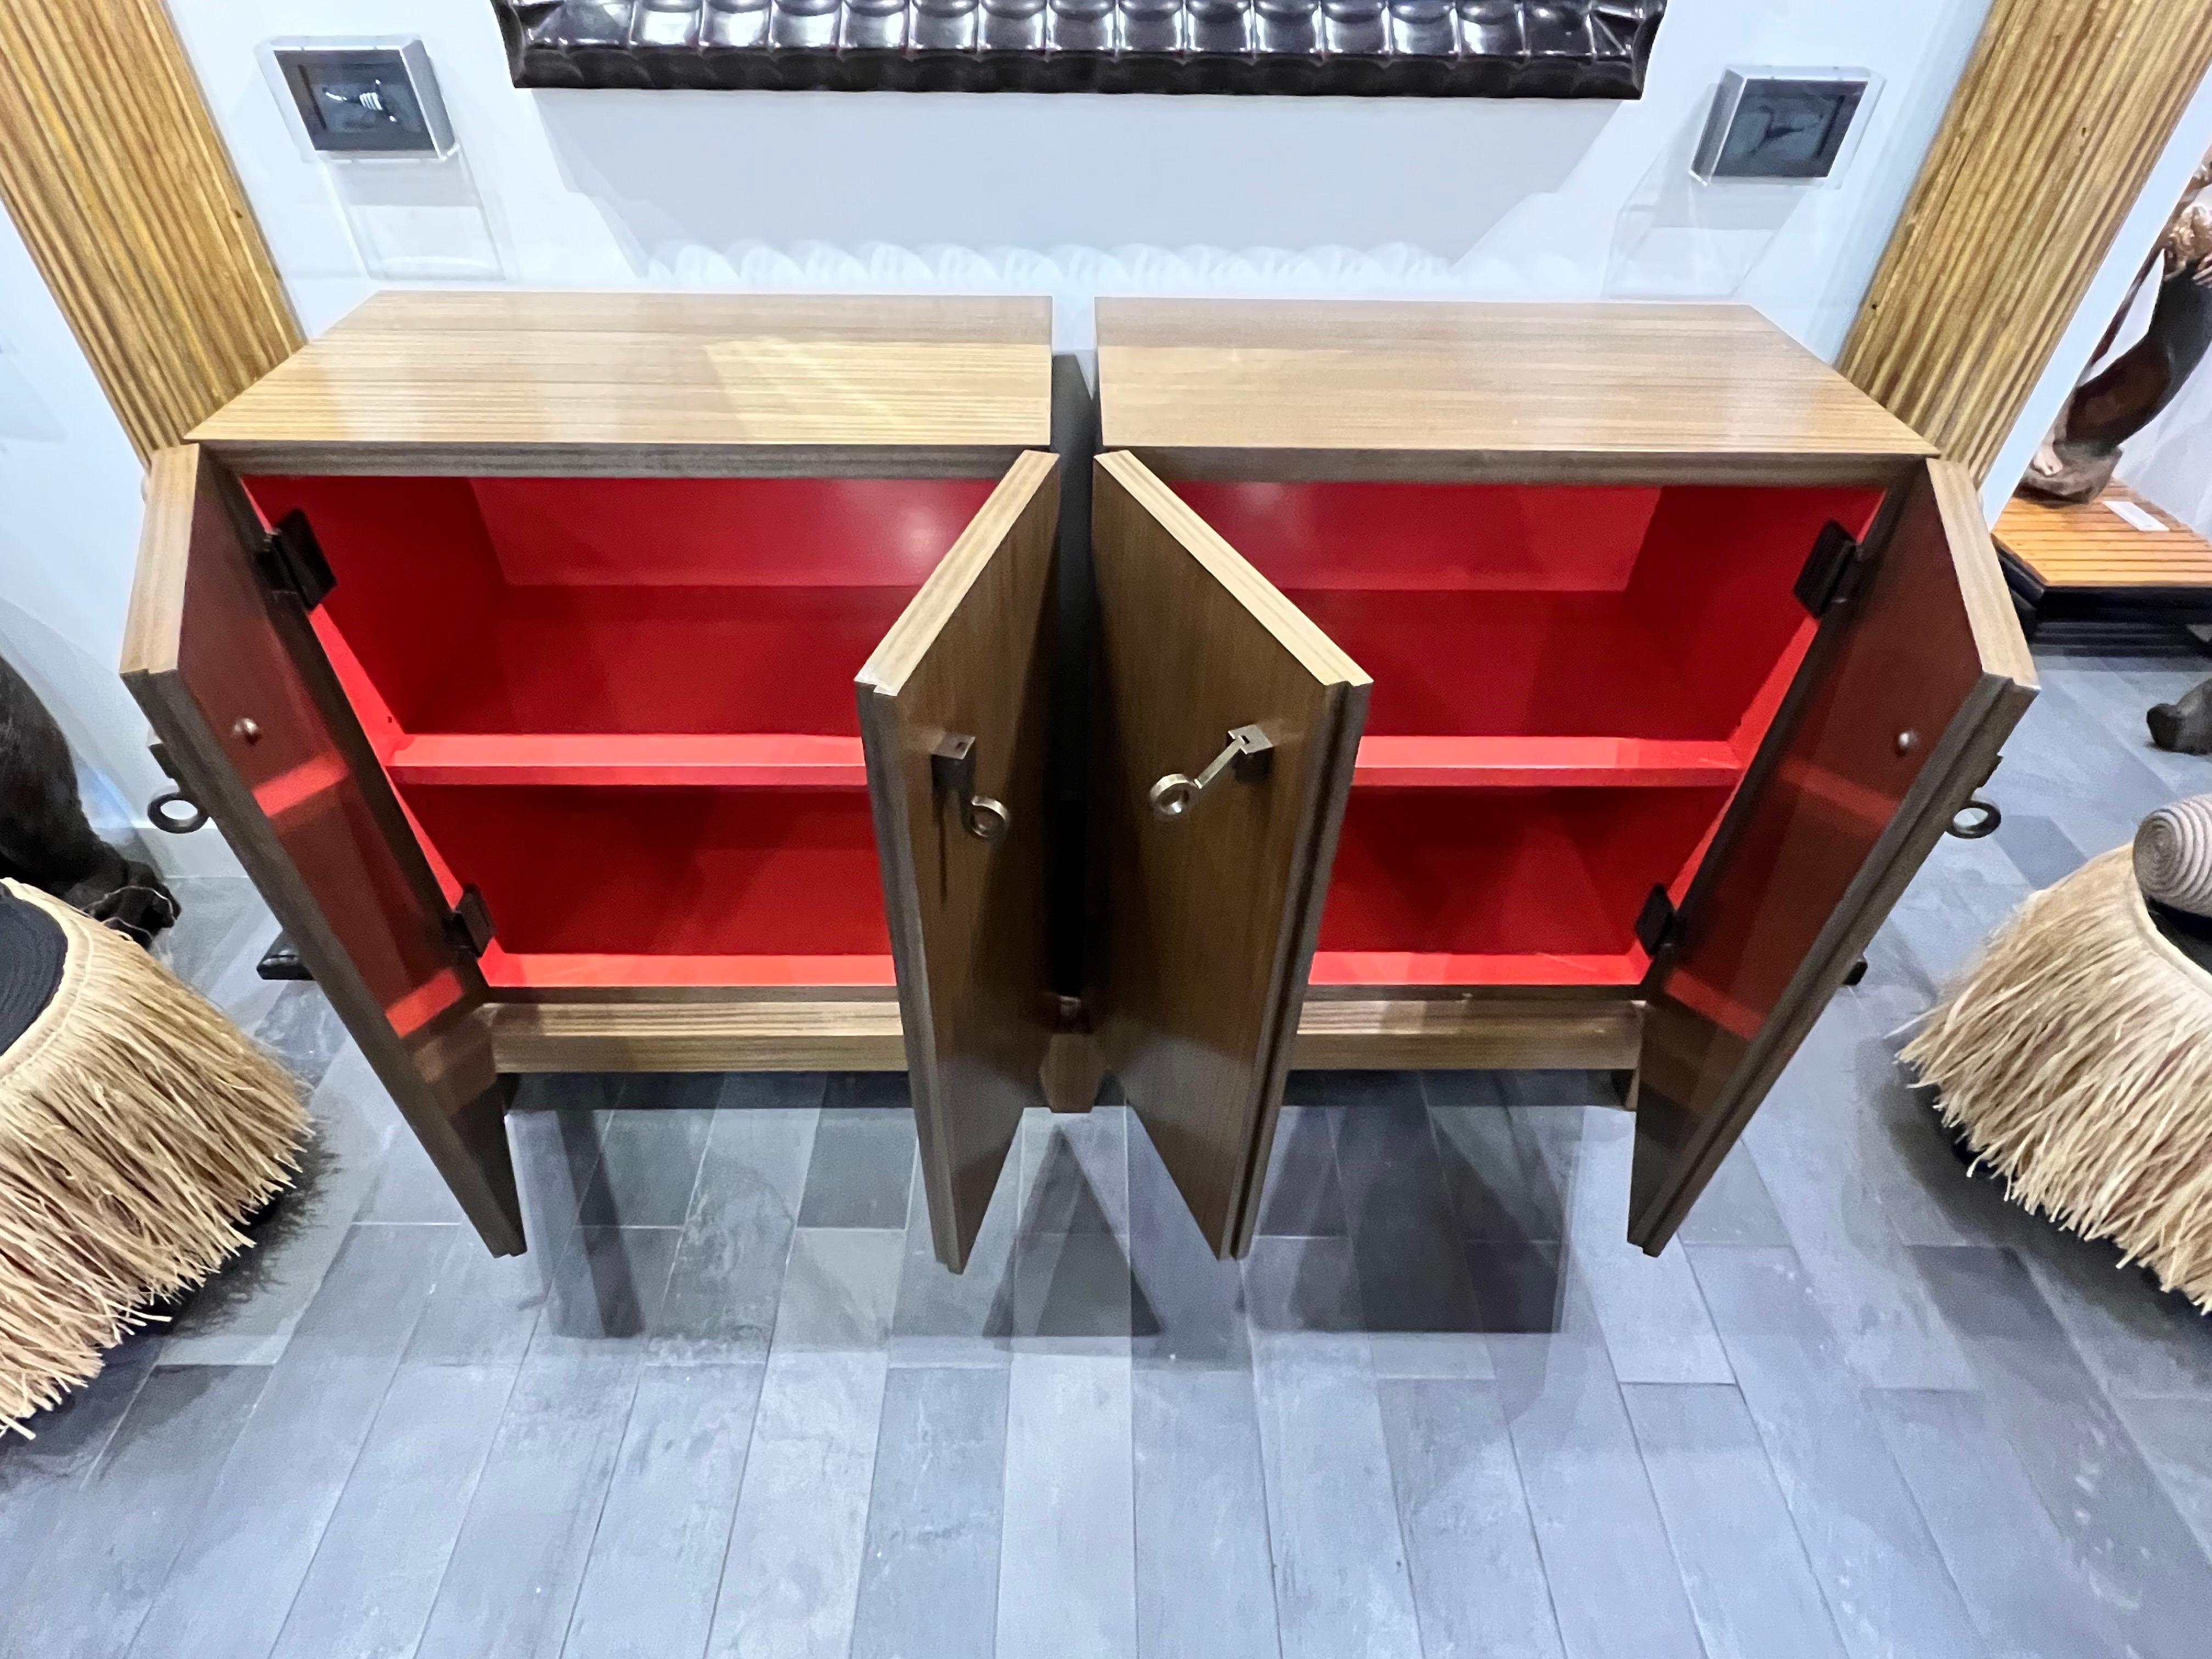 Italian Amarcord Double Modular Cabinets / Chests by Promemoria 1